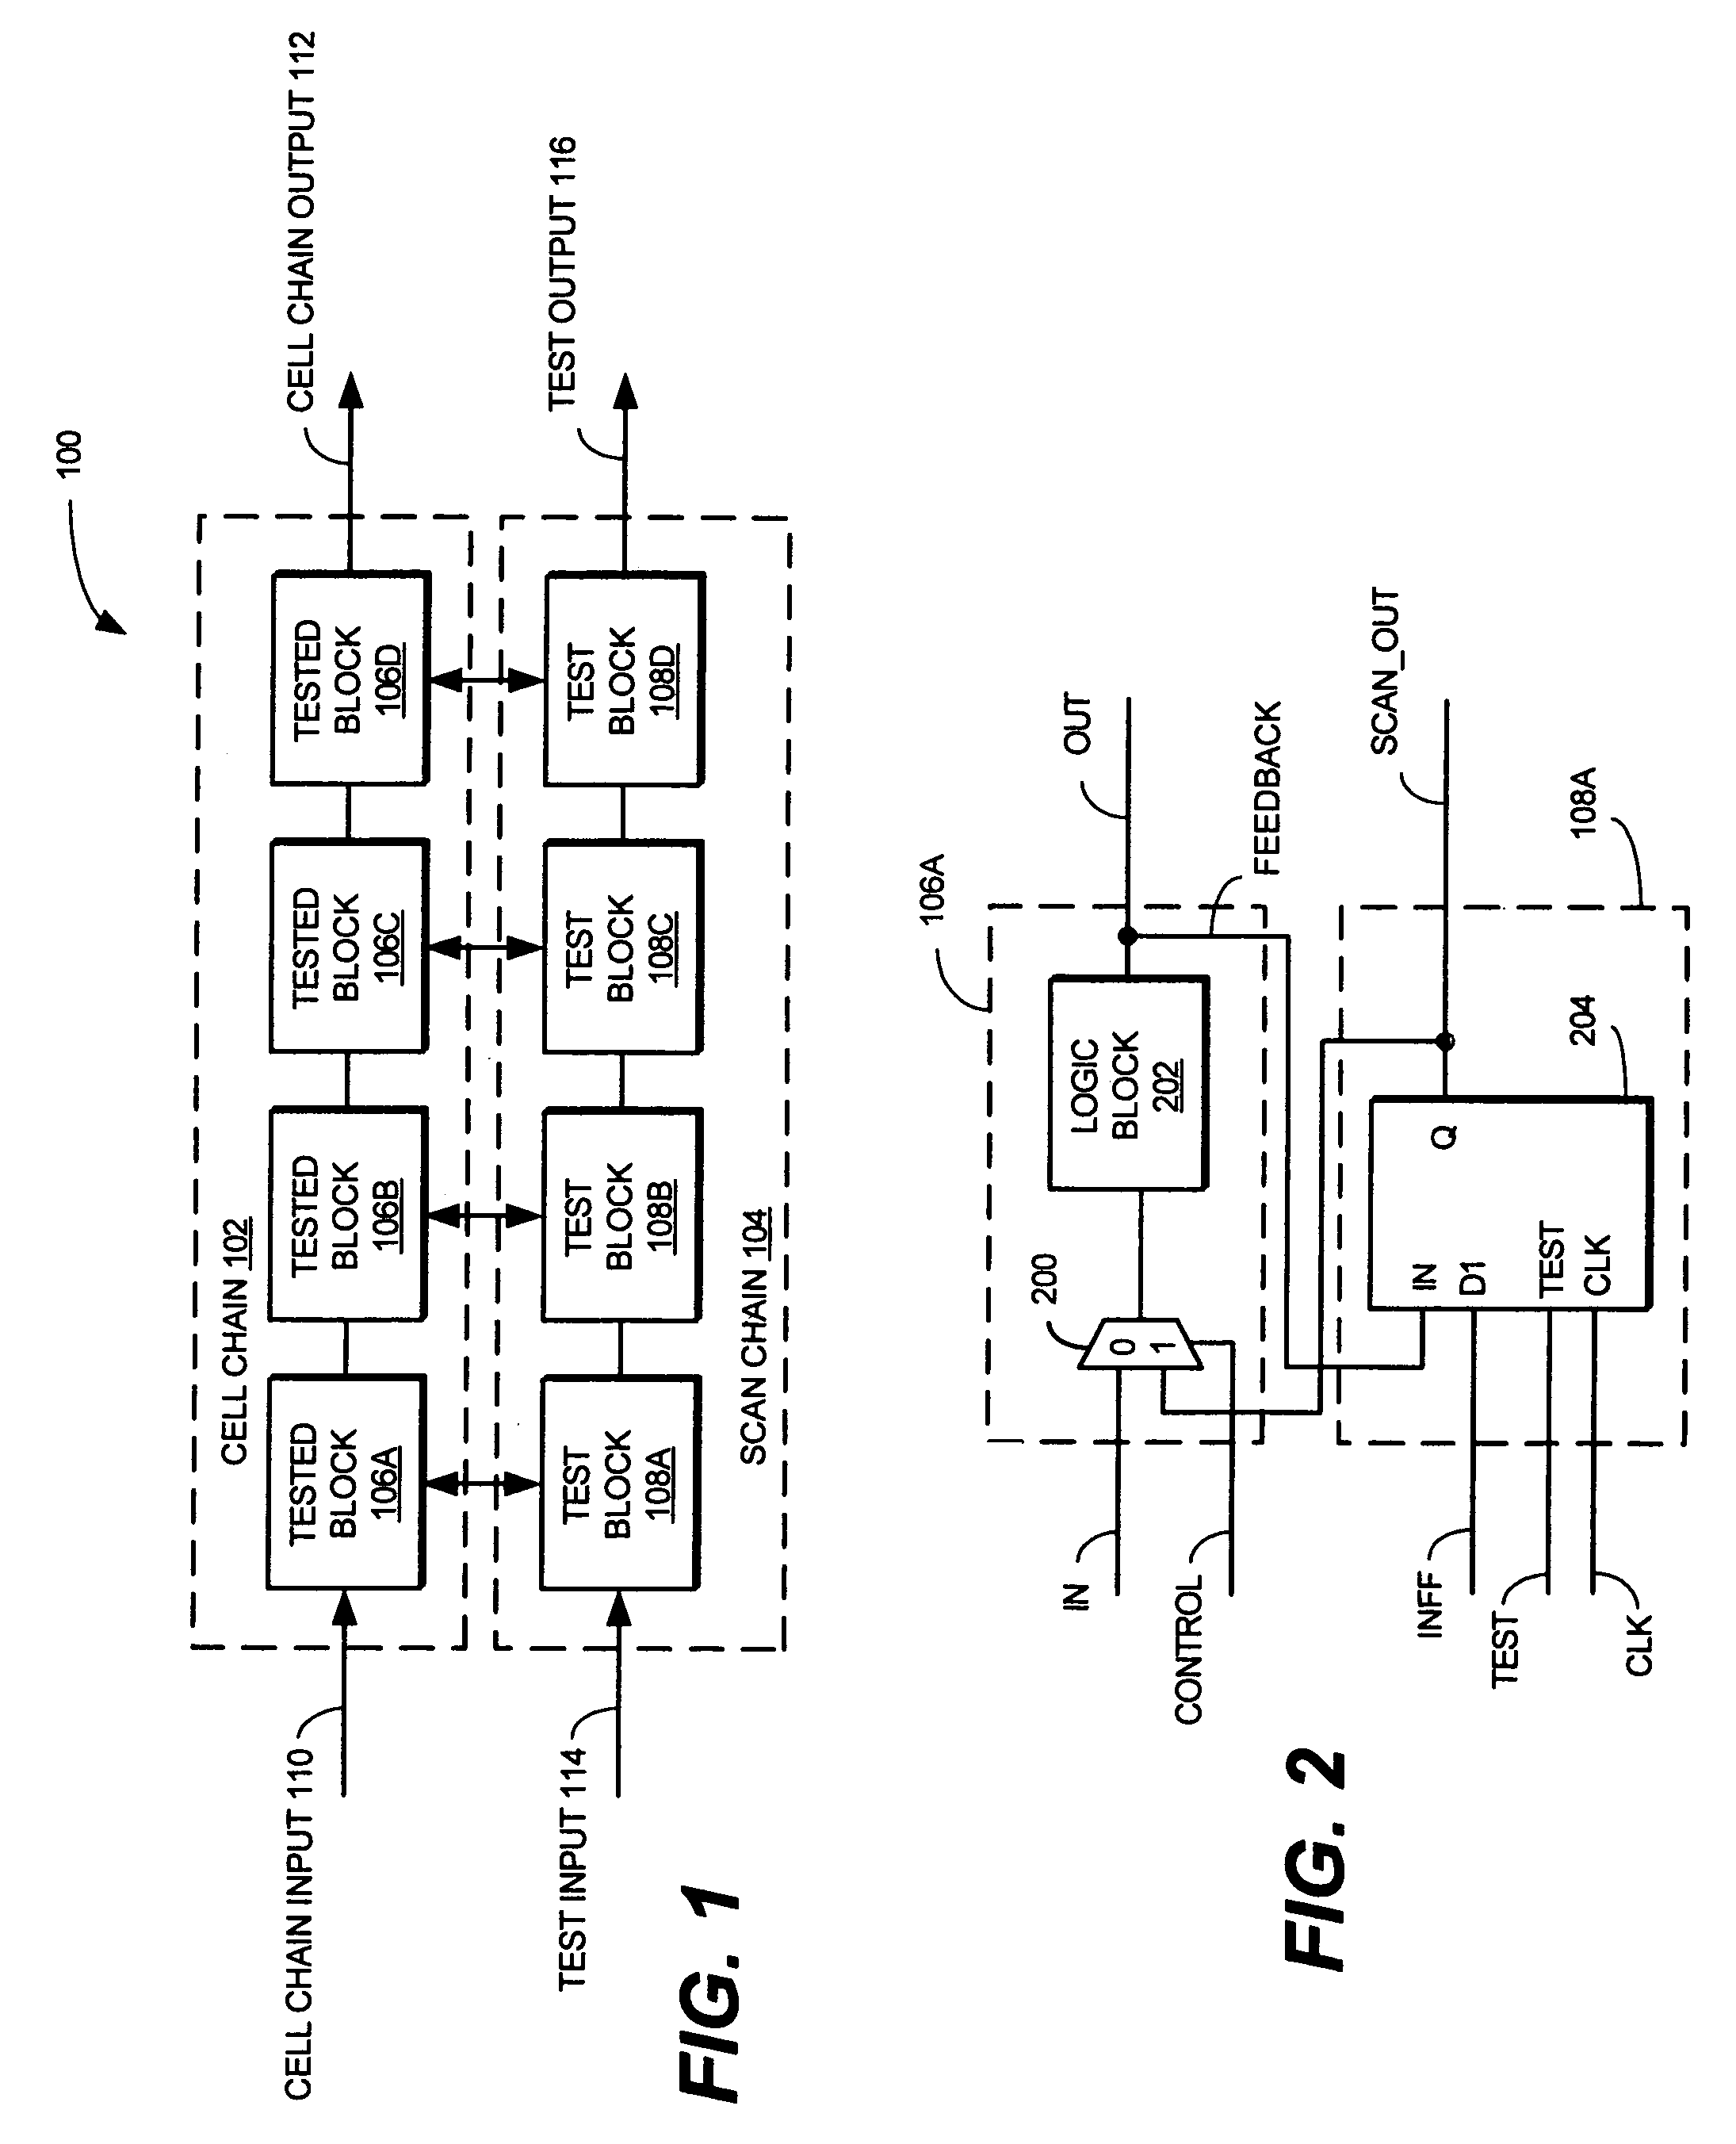 Method and apparatus for determining stuck-at fault locations in cell chains using scan chains